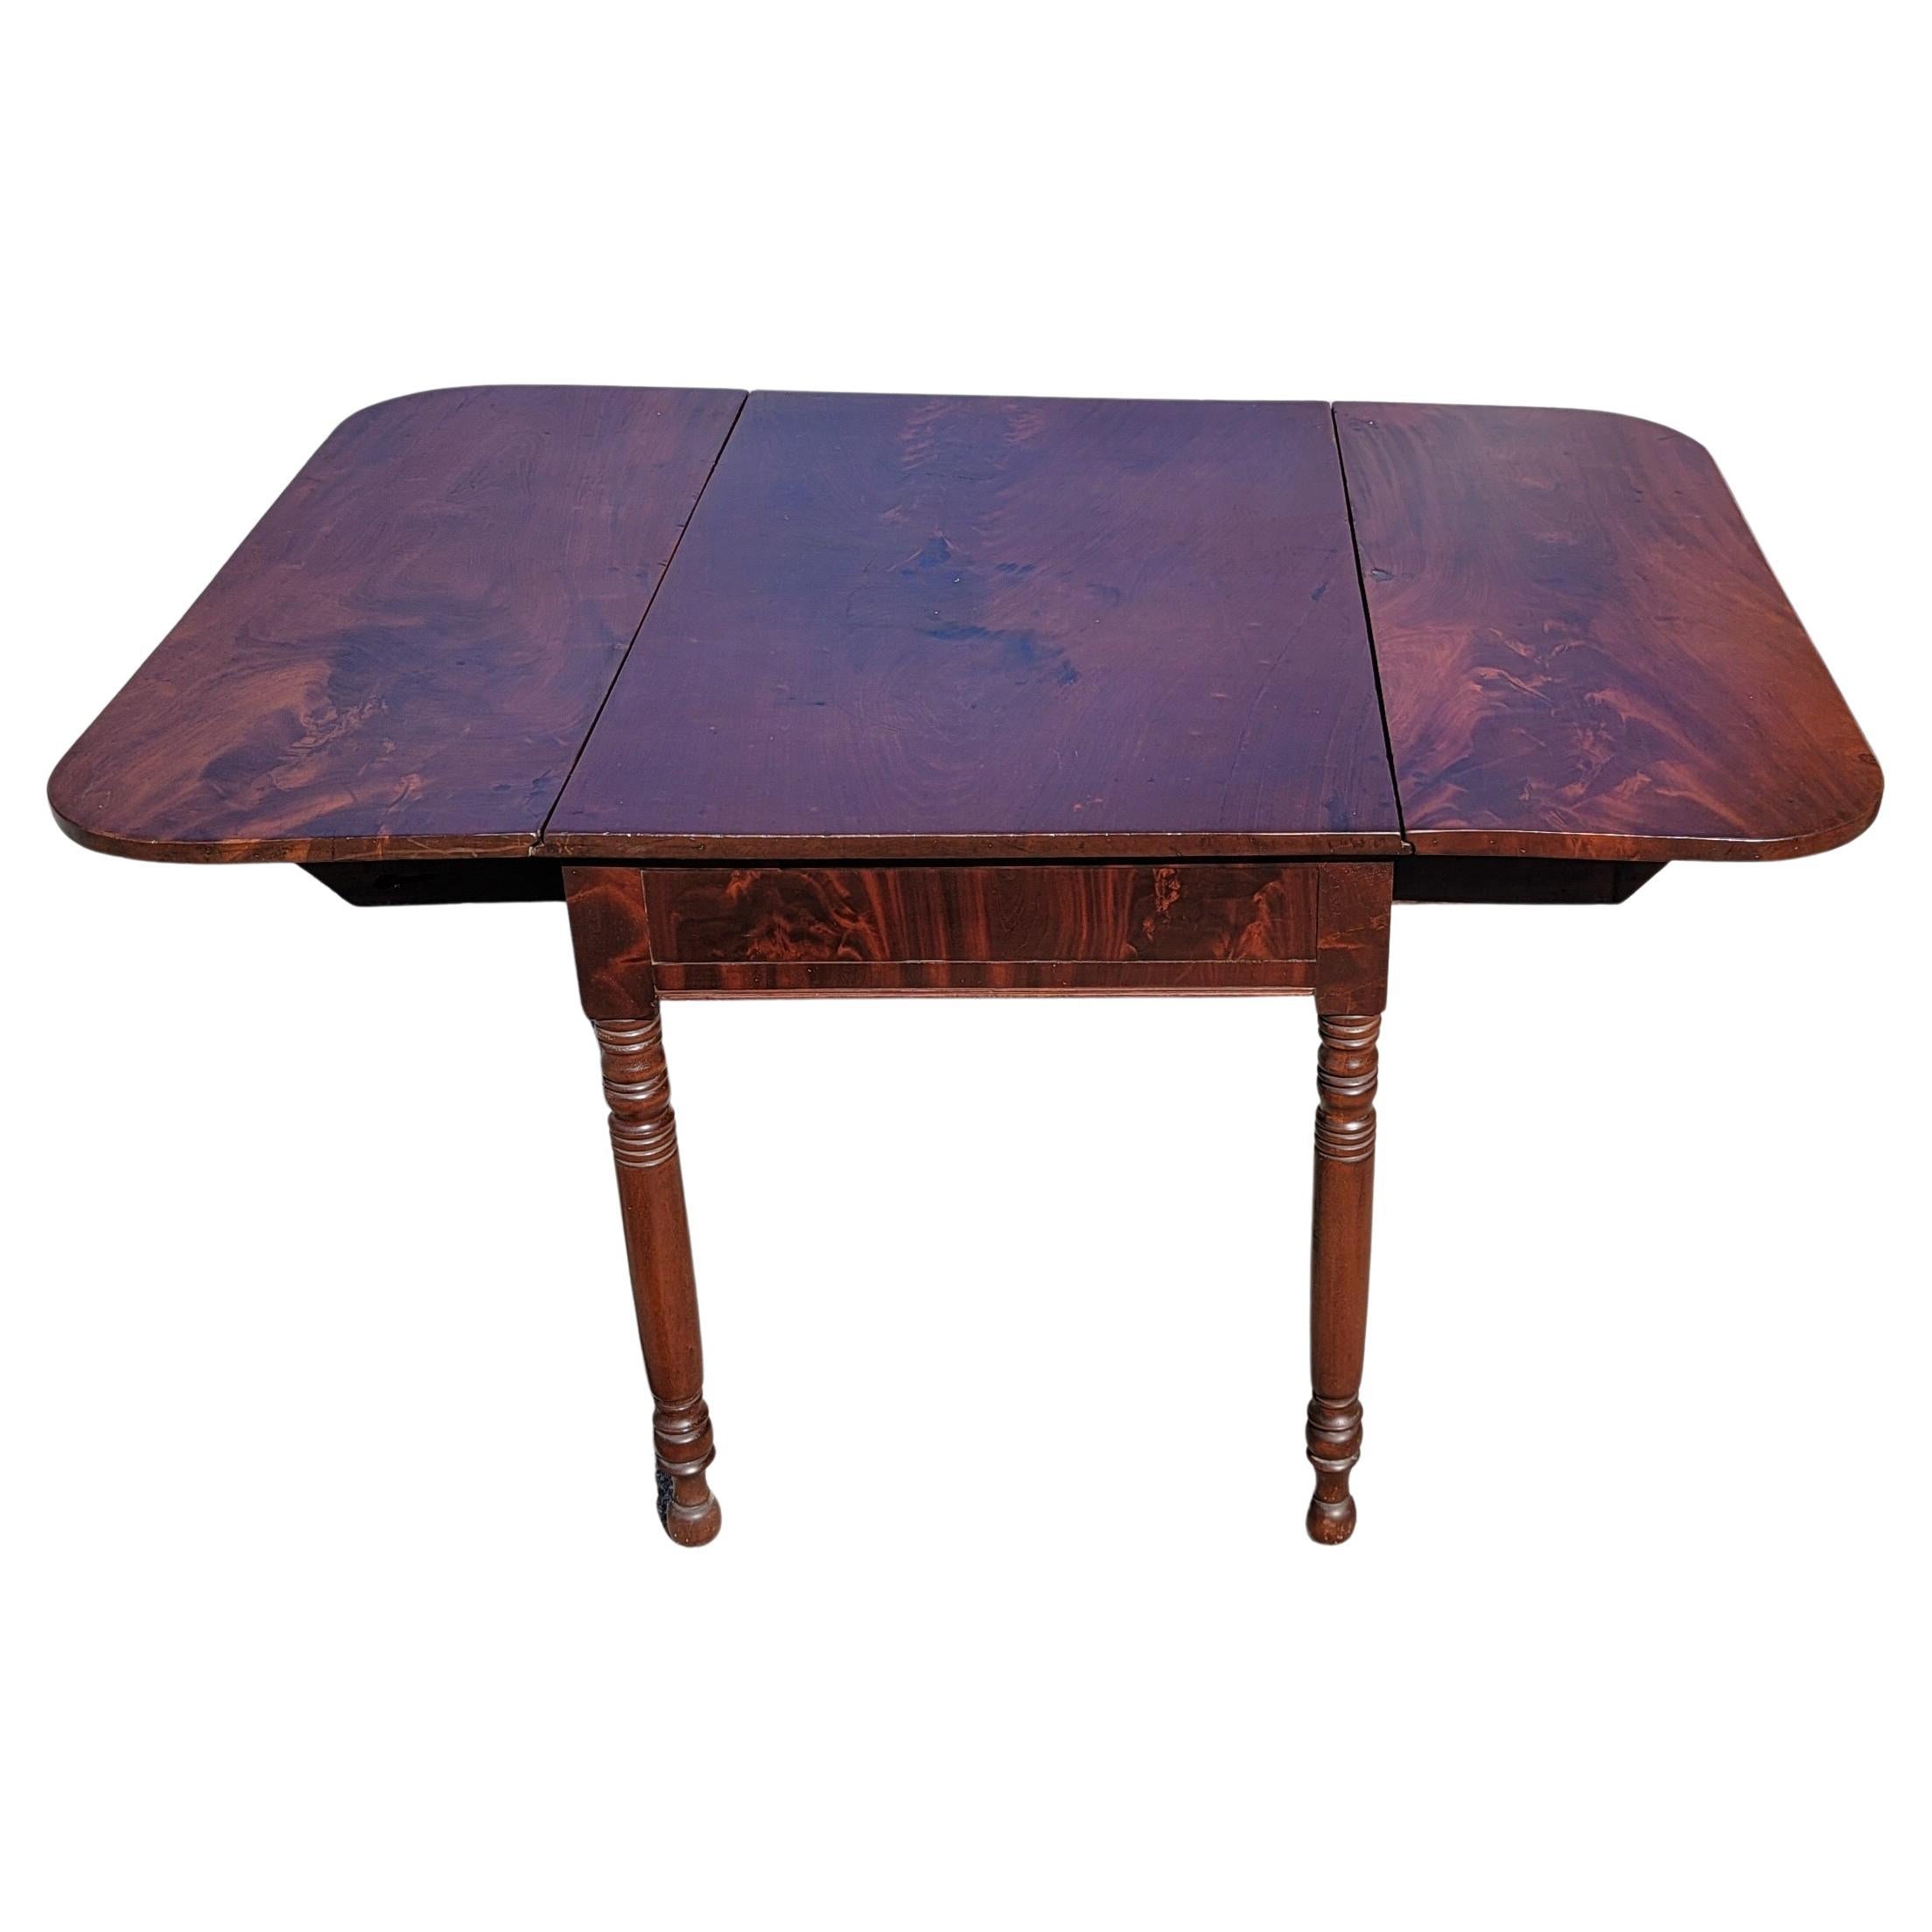 19th Century American Empire Federal Flame Mahogany Drop-Leaf Dining Table For Sale 3